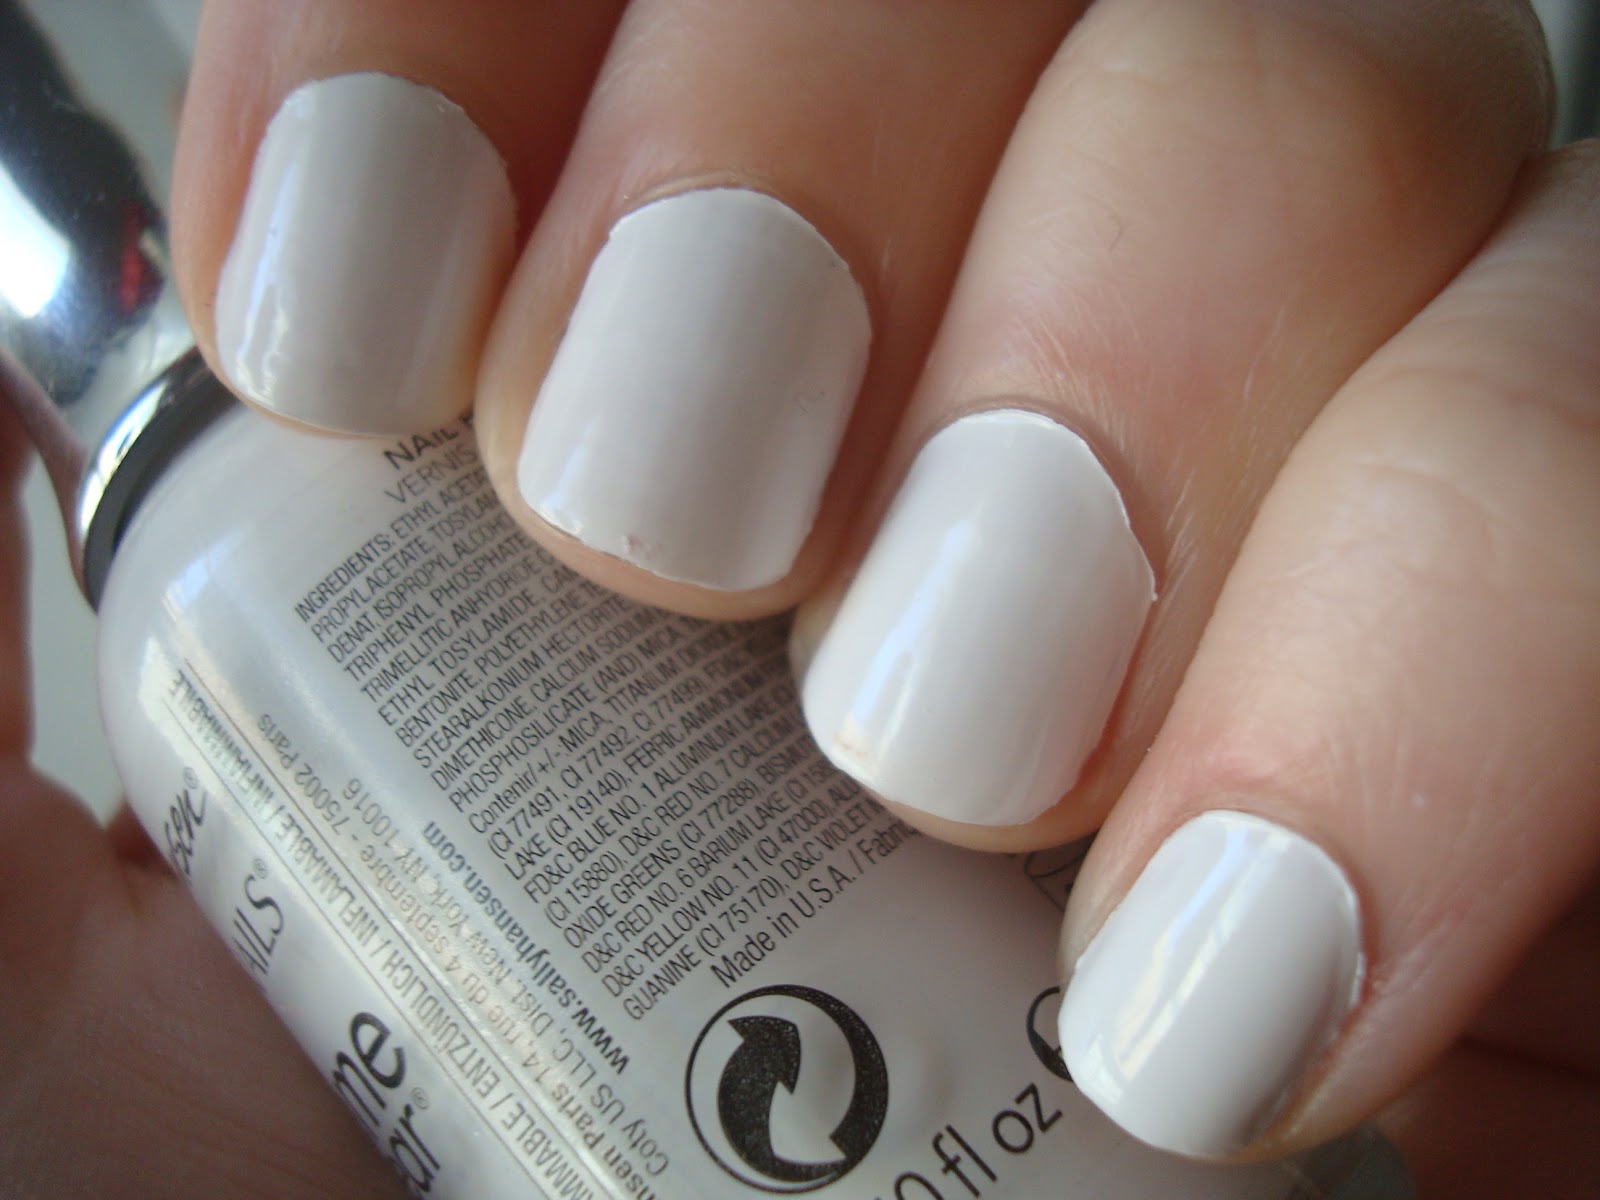 3. Sally Hansen Hard as Nails Xtreme Wear in White On - wide 4